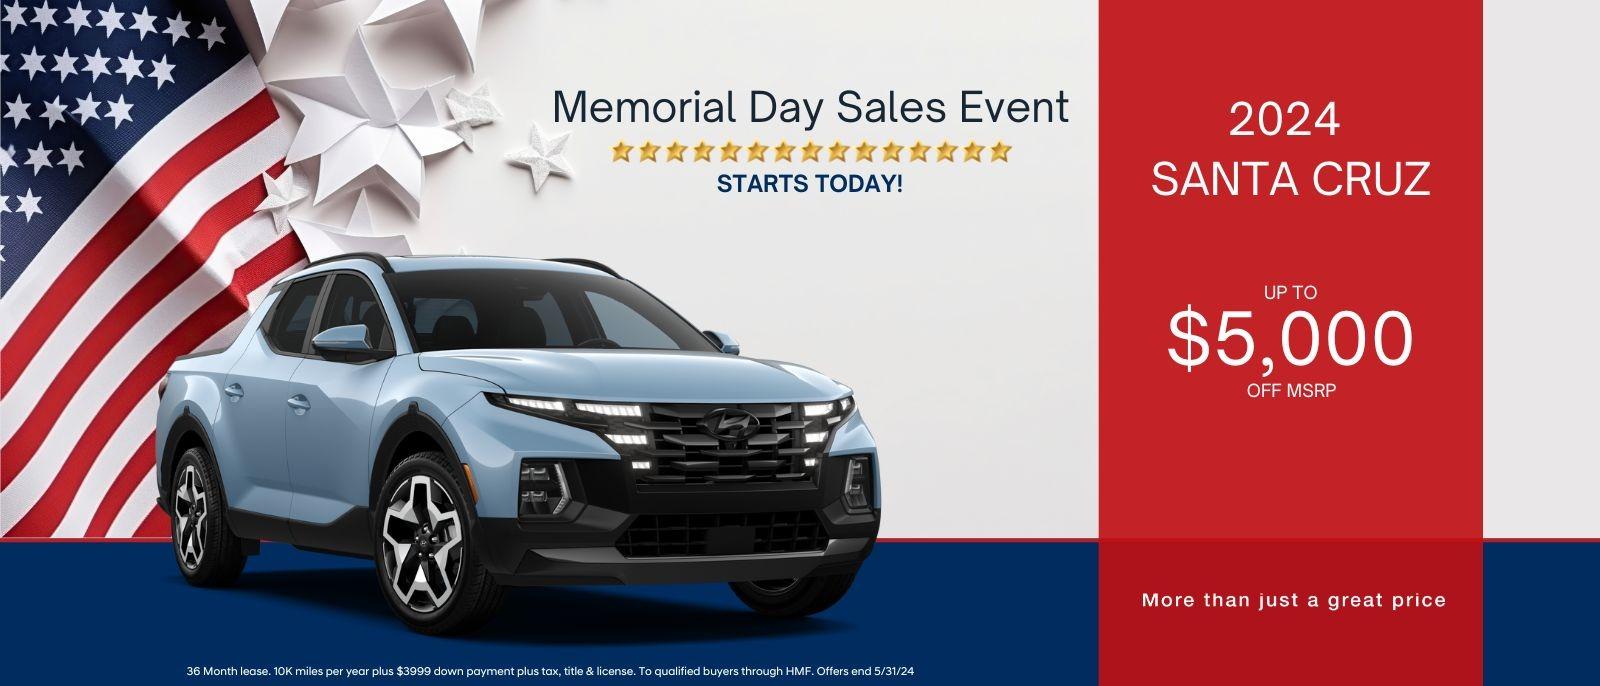 Memorial Day Sales Event Starts Today

2024 Santa Cruz 
Up To $5,000 Off MSRP 
More than just a great price.